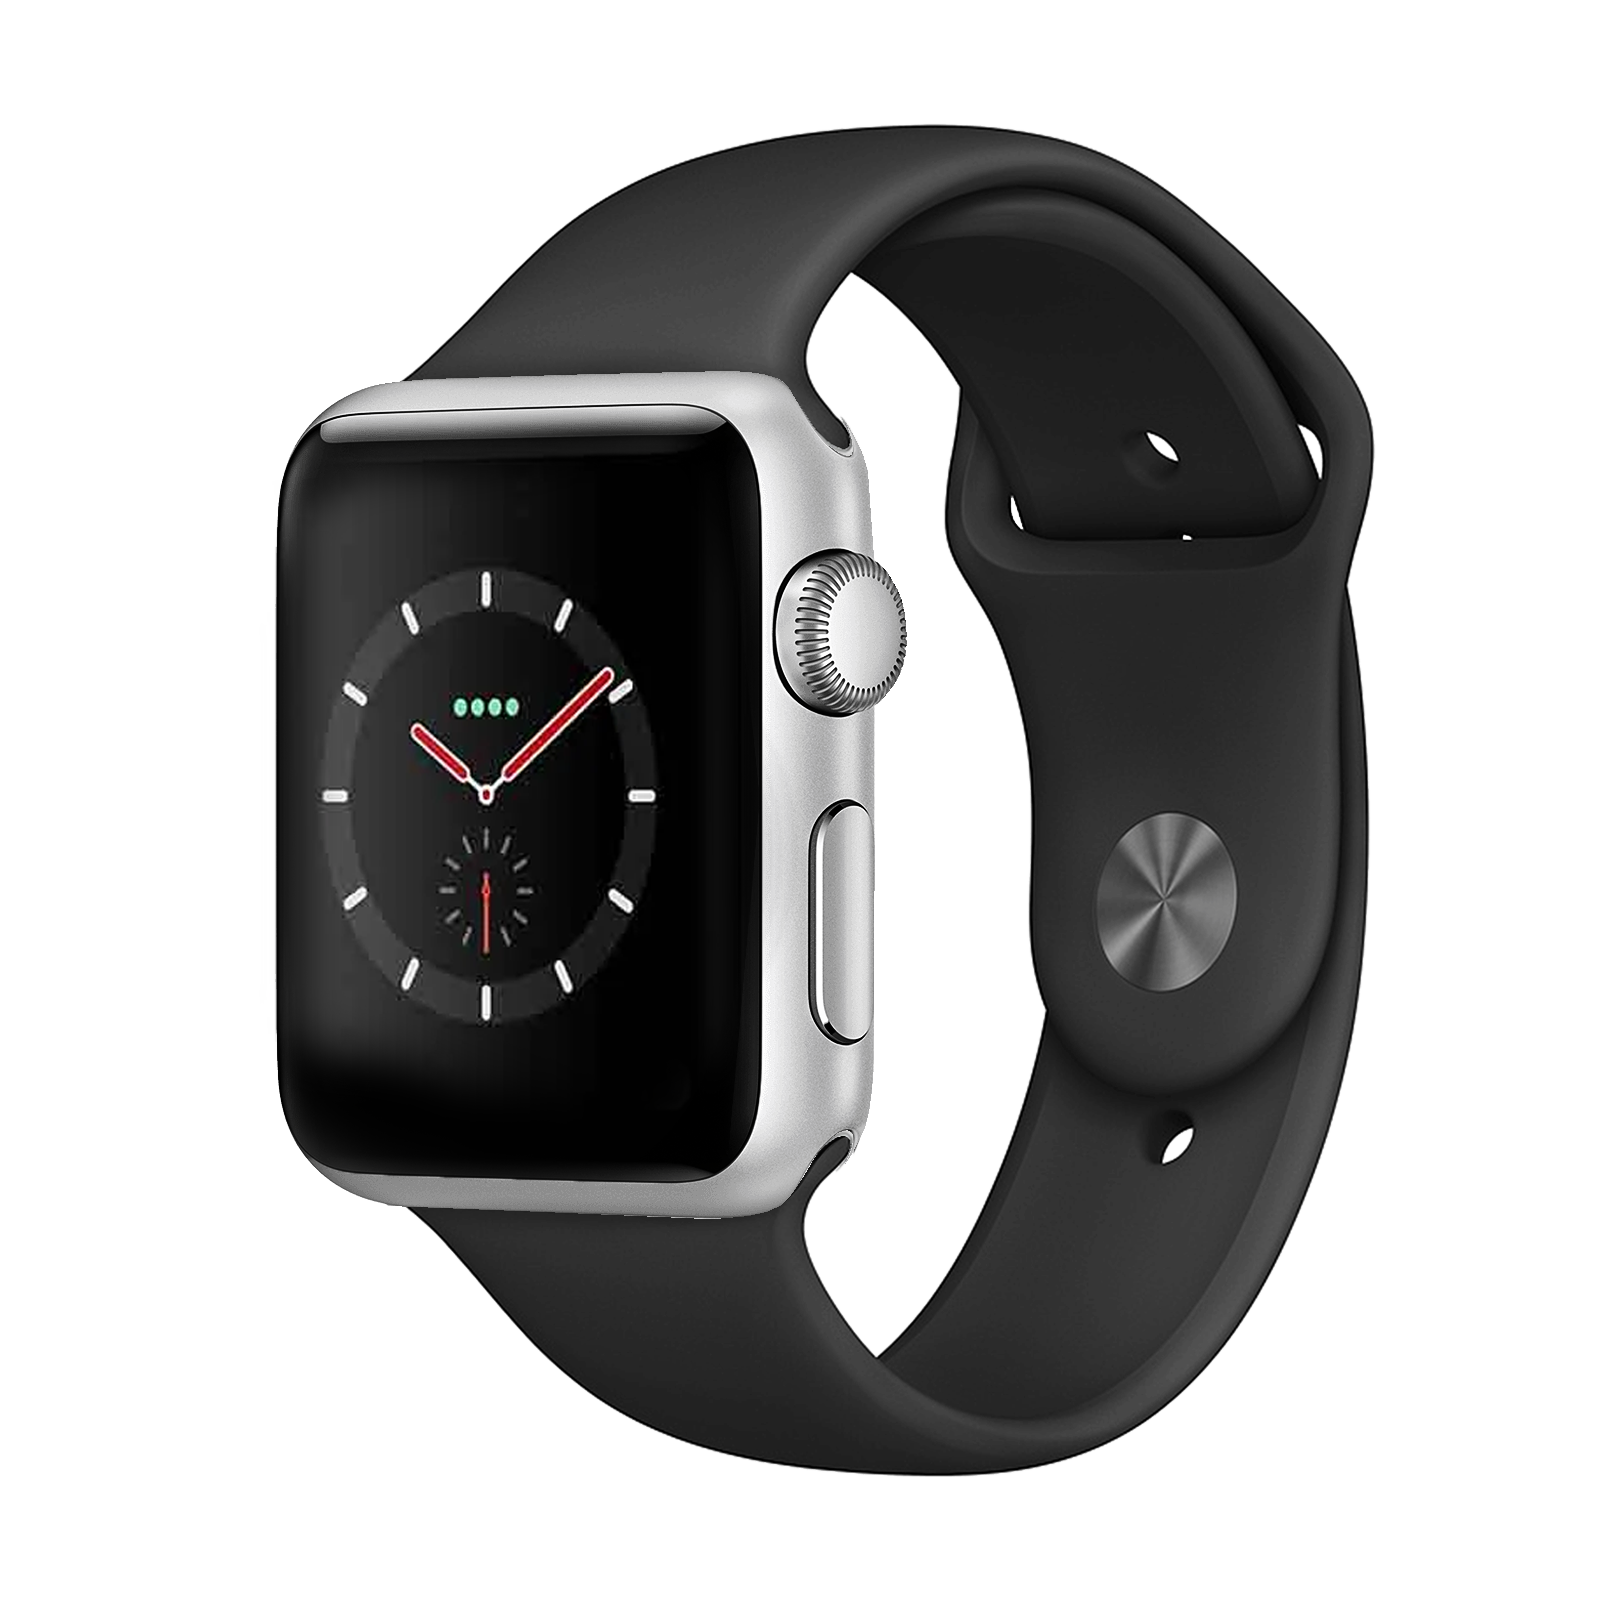 Apple Watch Series 3 Stainless 42mm Silver Good Cellular - Unlocked